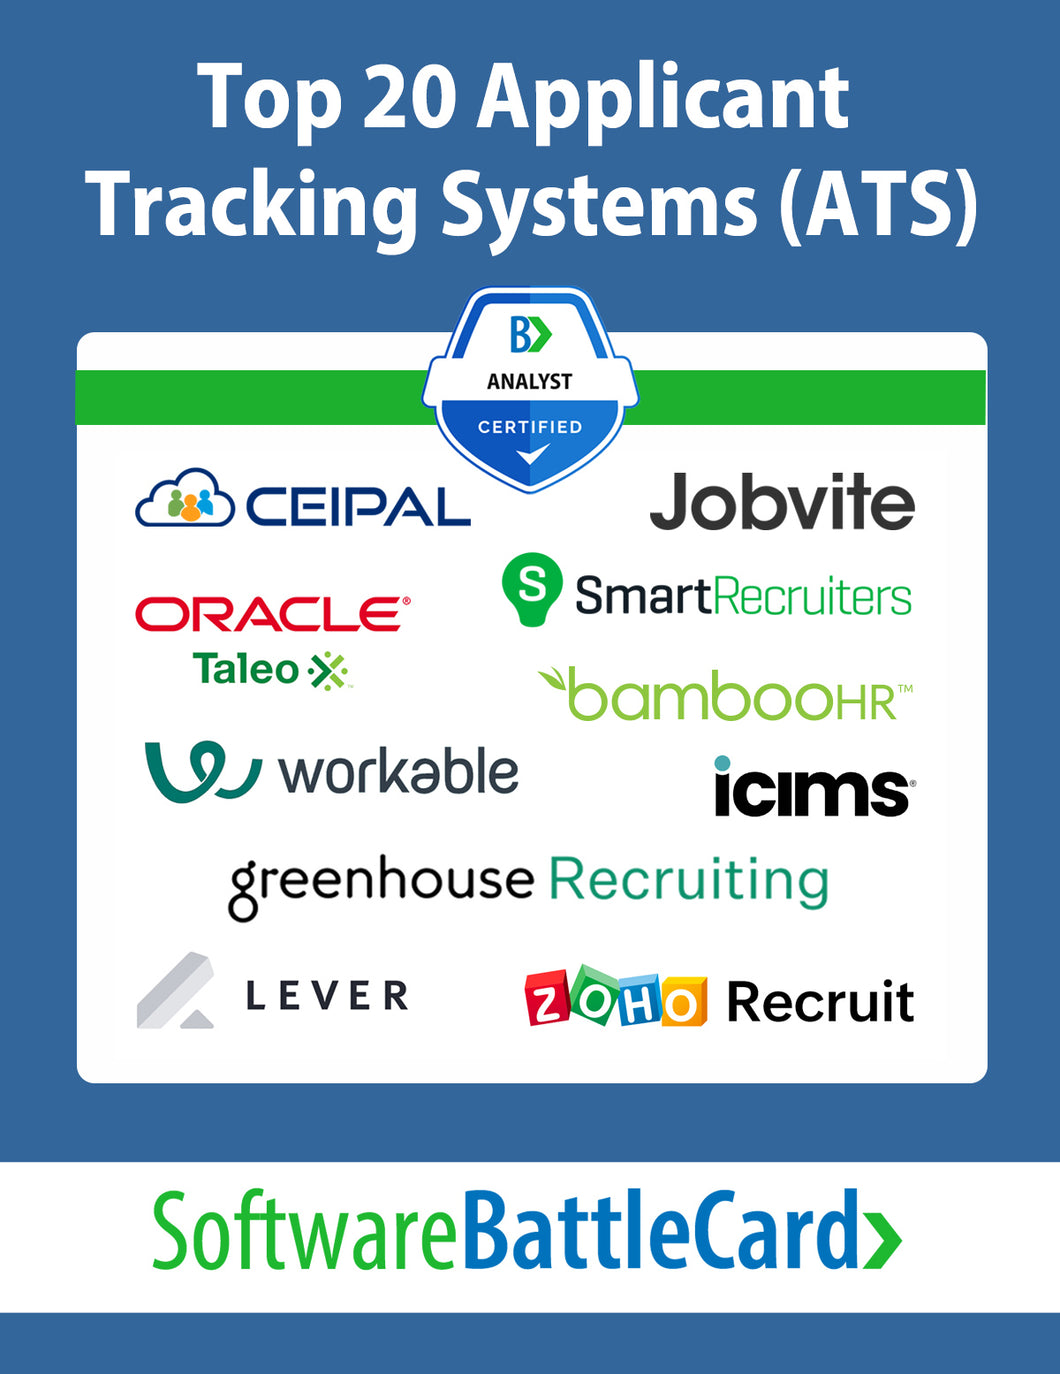 Top 20 Applicant Tracking Systems BattleCard